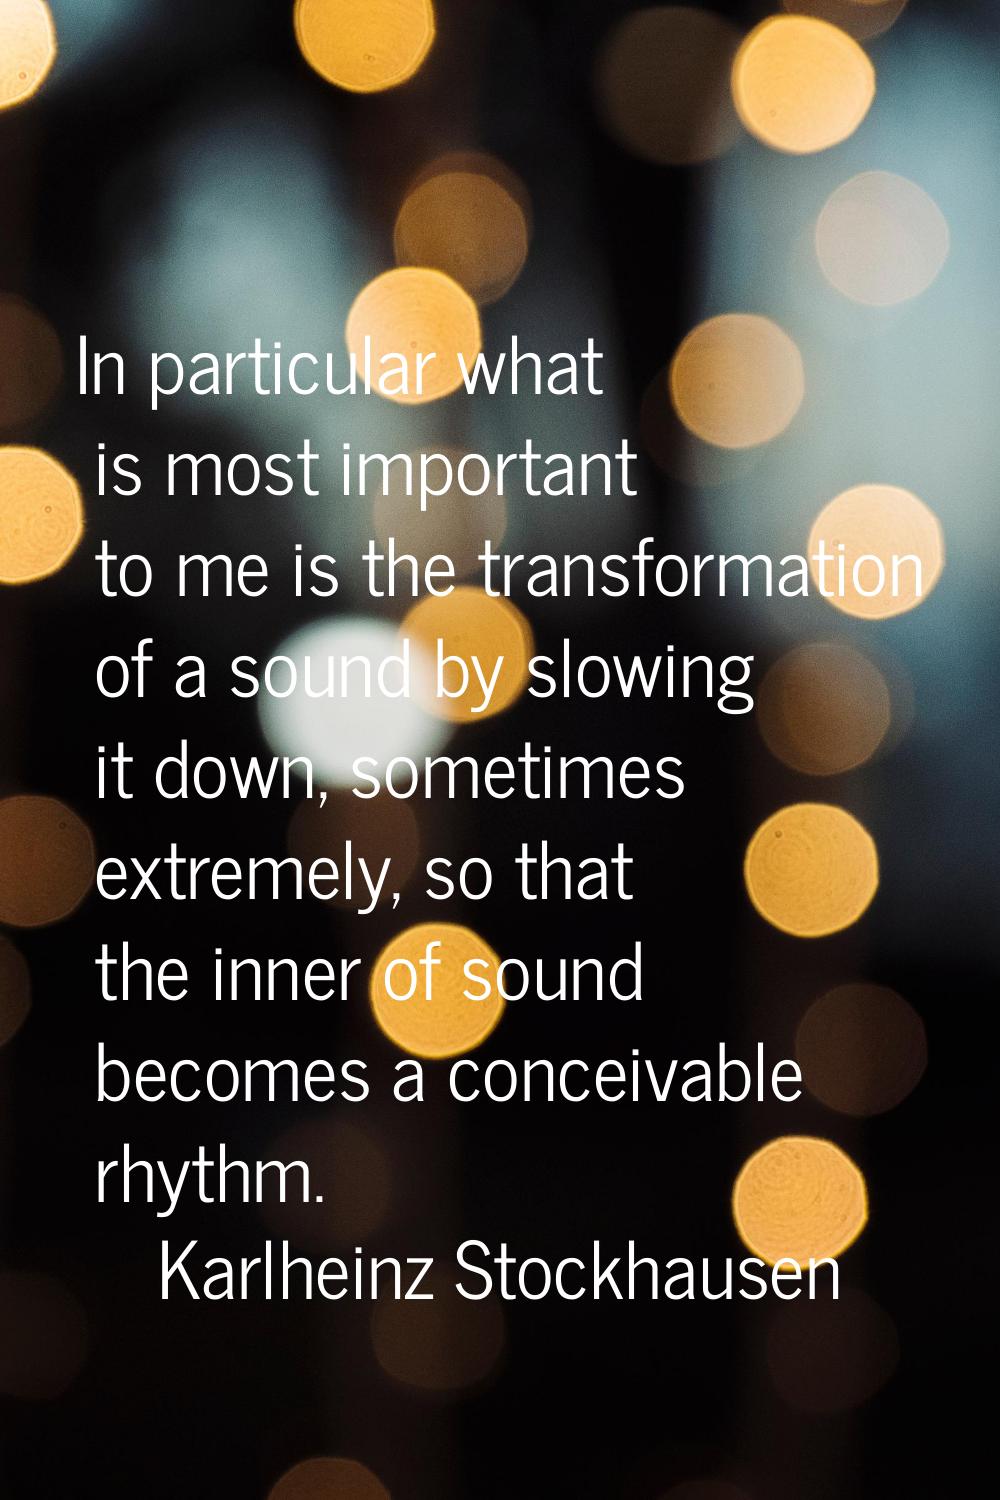 In particular what is most important to me is the transformation of a sound by slowing it down, som